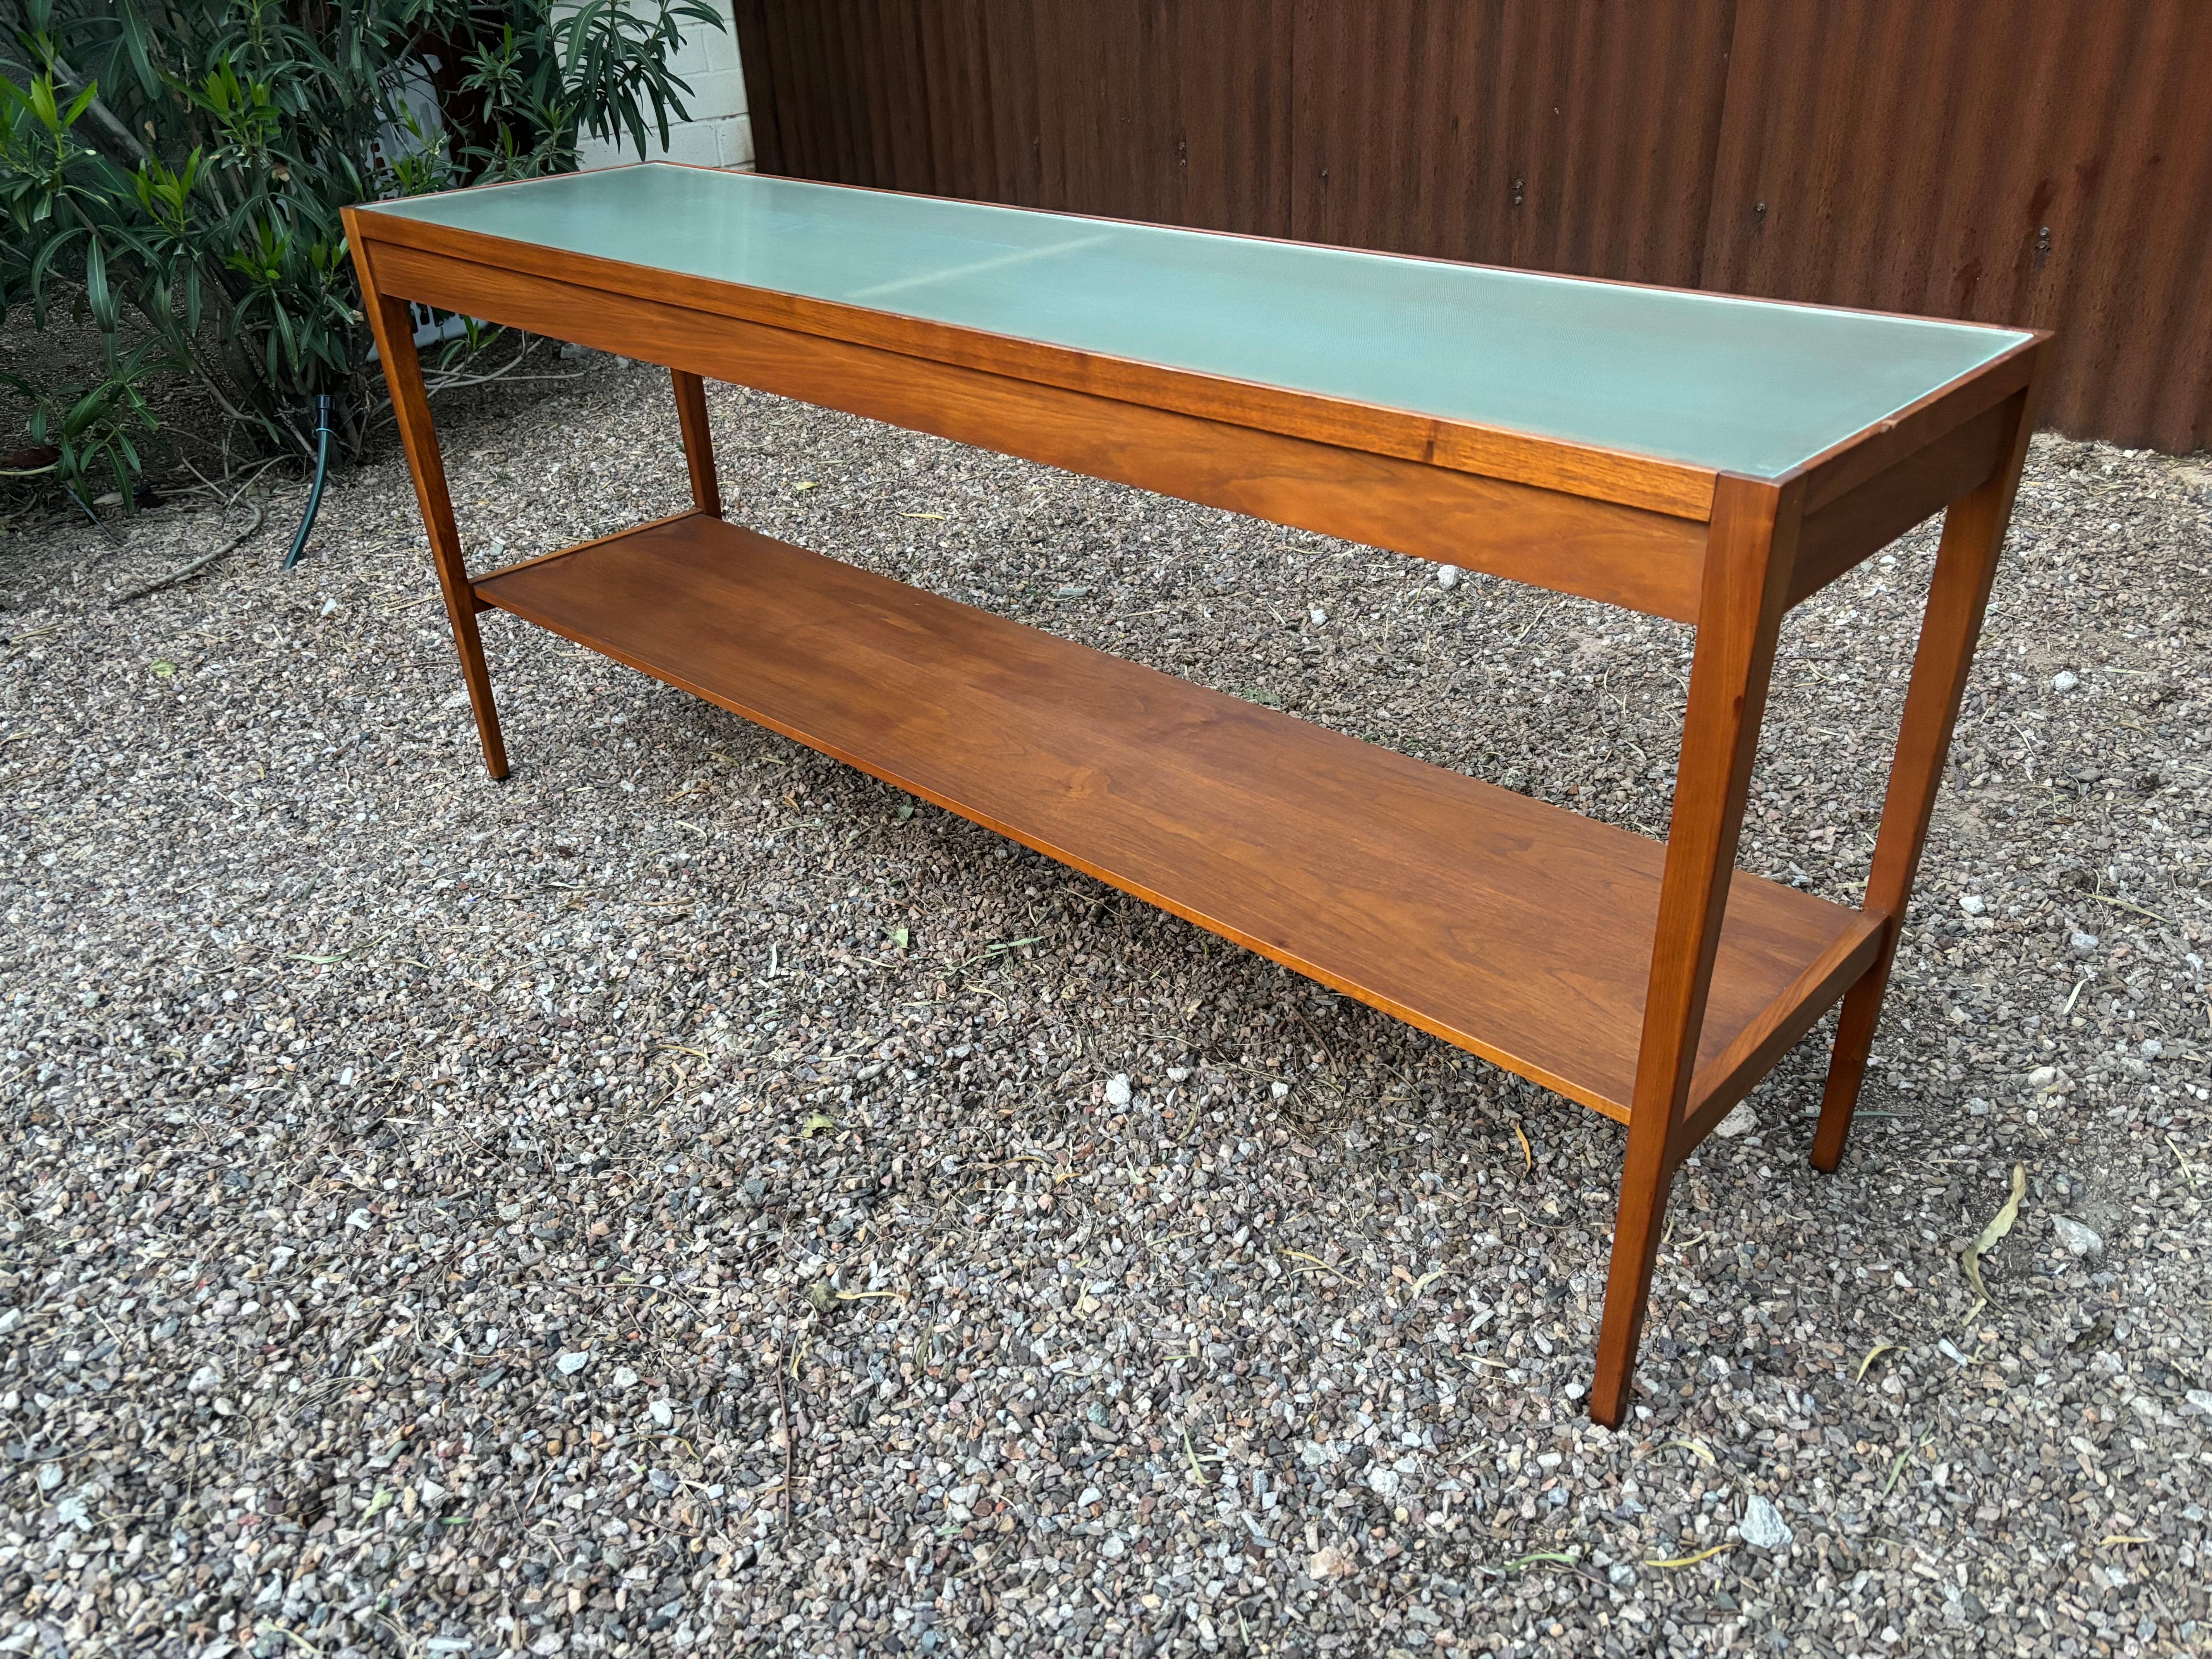 Directional Walnut and Glass Console or Entrance Table attributed to Milo Baughman or Paul McCobb.  Probably originally had a stone or white glass top.  Retains Directional label that looks like mid 60's.  Great Scale and size, bonus bottom shelf! 